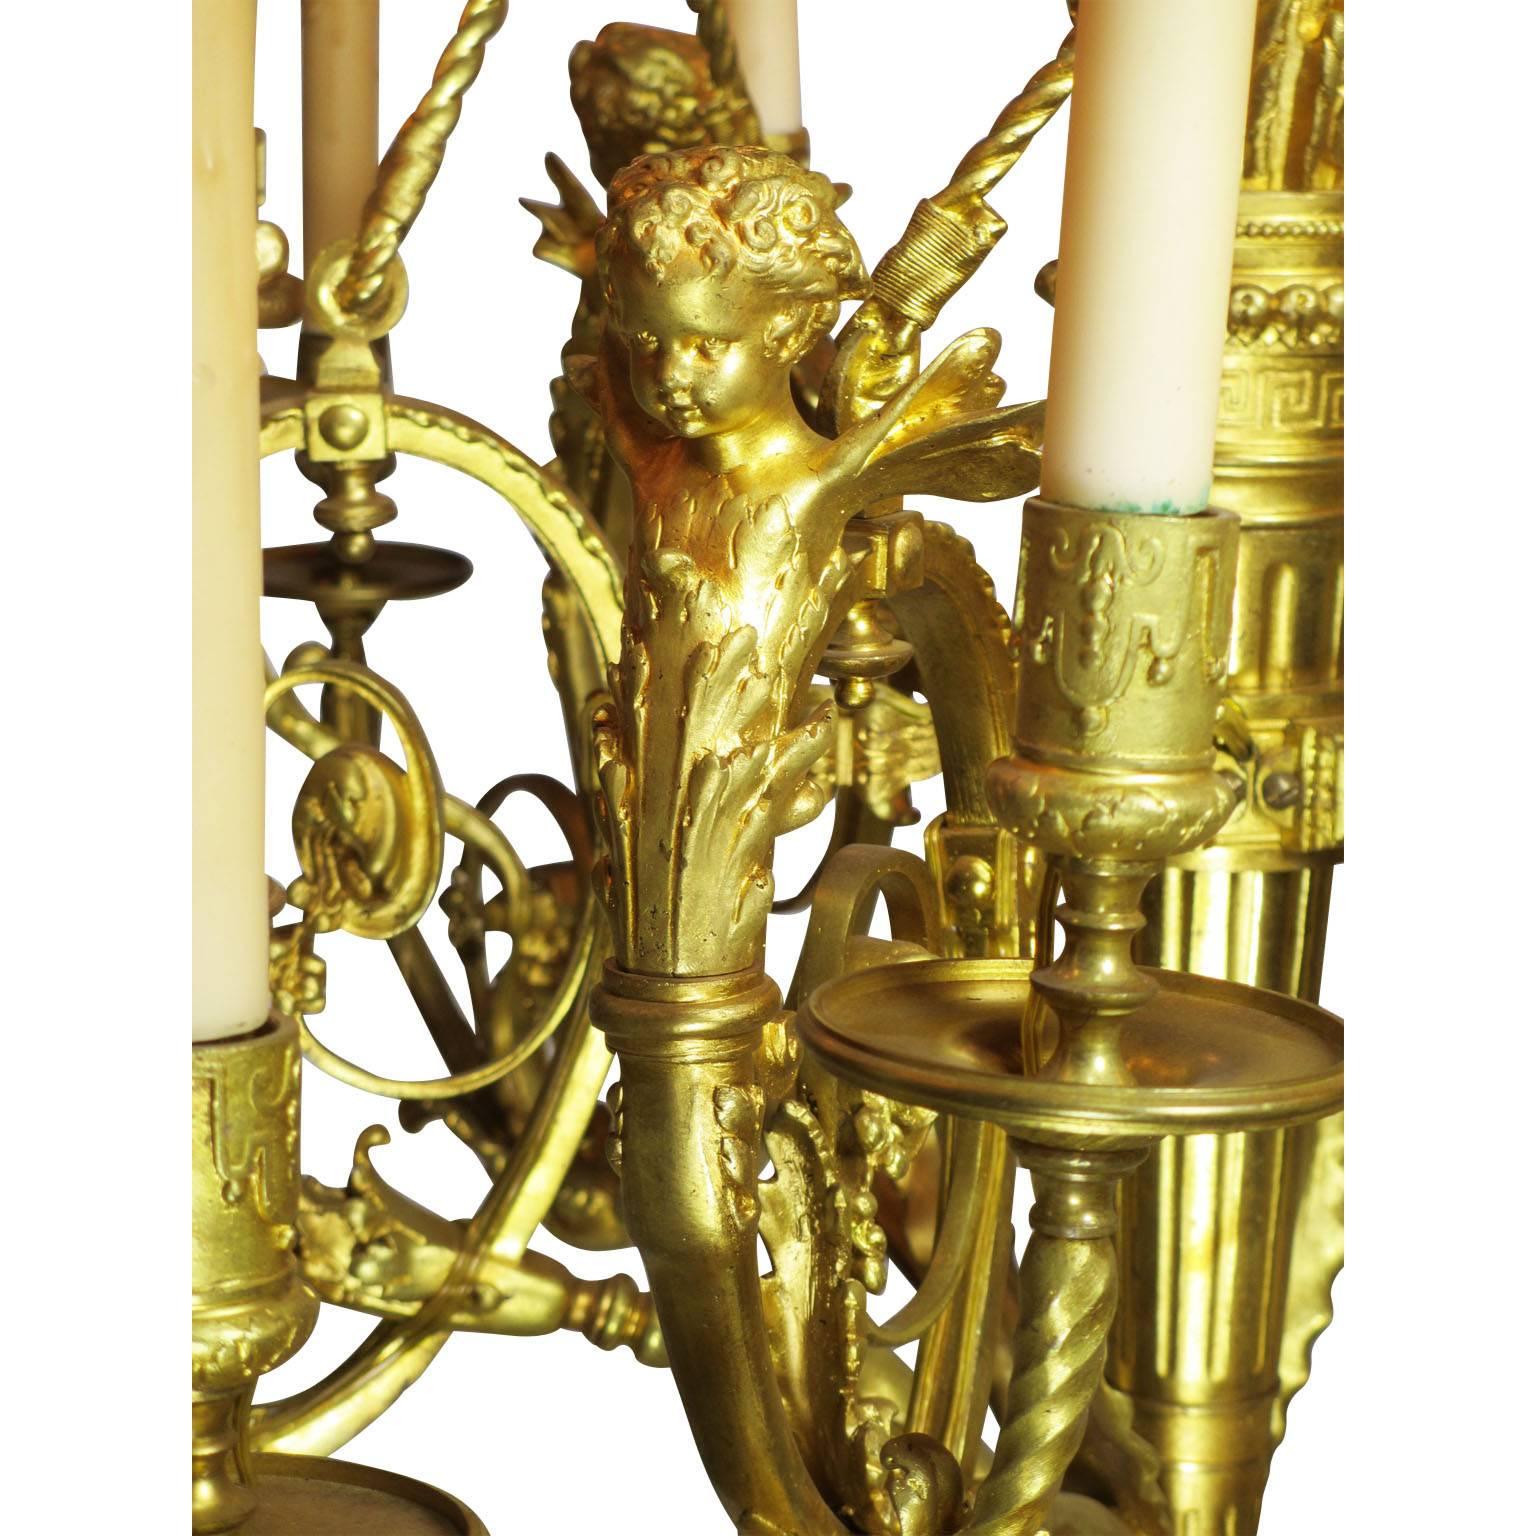 A French Belle Époque 19th-20th Century 18-Light Gilt Bronze Cherub Chandelier In Good Condition For Sale In Los Angeles, CA